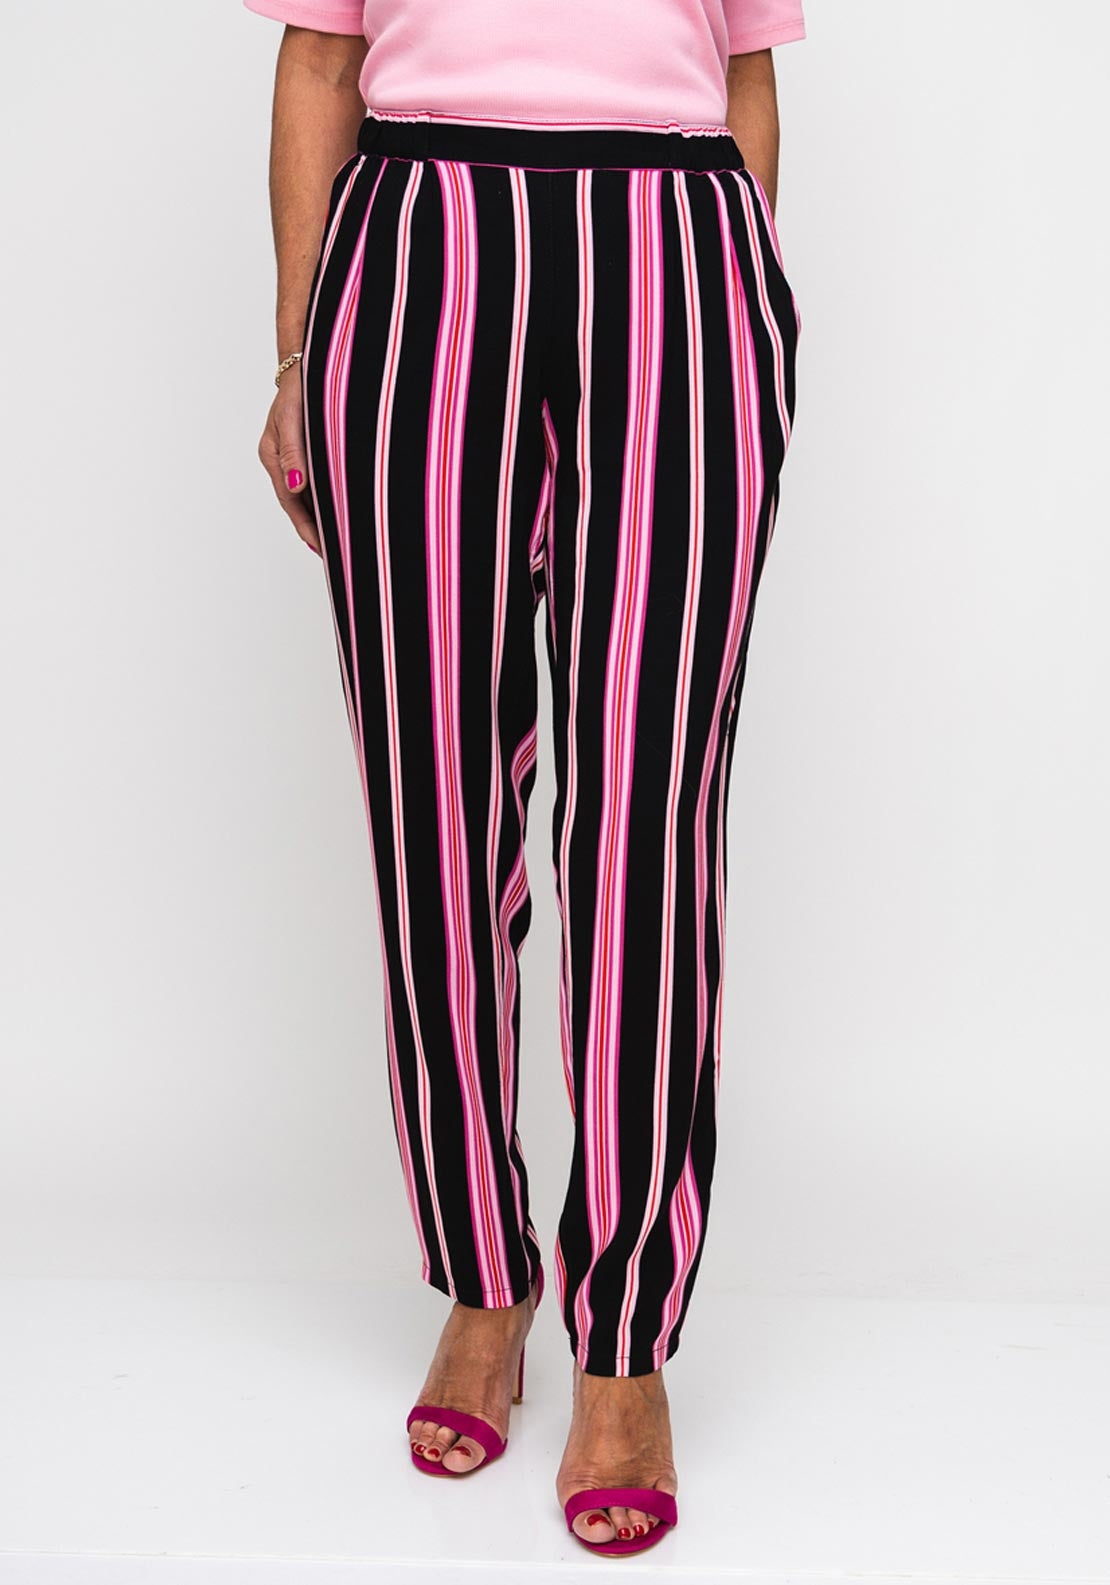 Sobriquette Groping itself Betty Barclay Striped Trousers, Black & Pink - McElhinneys